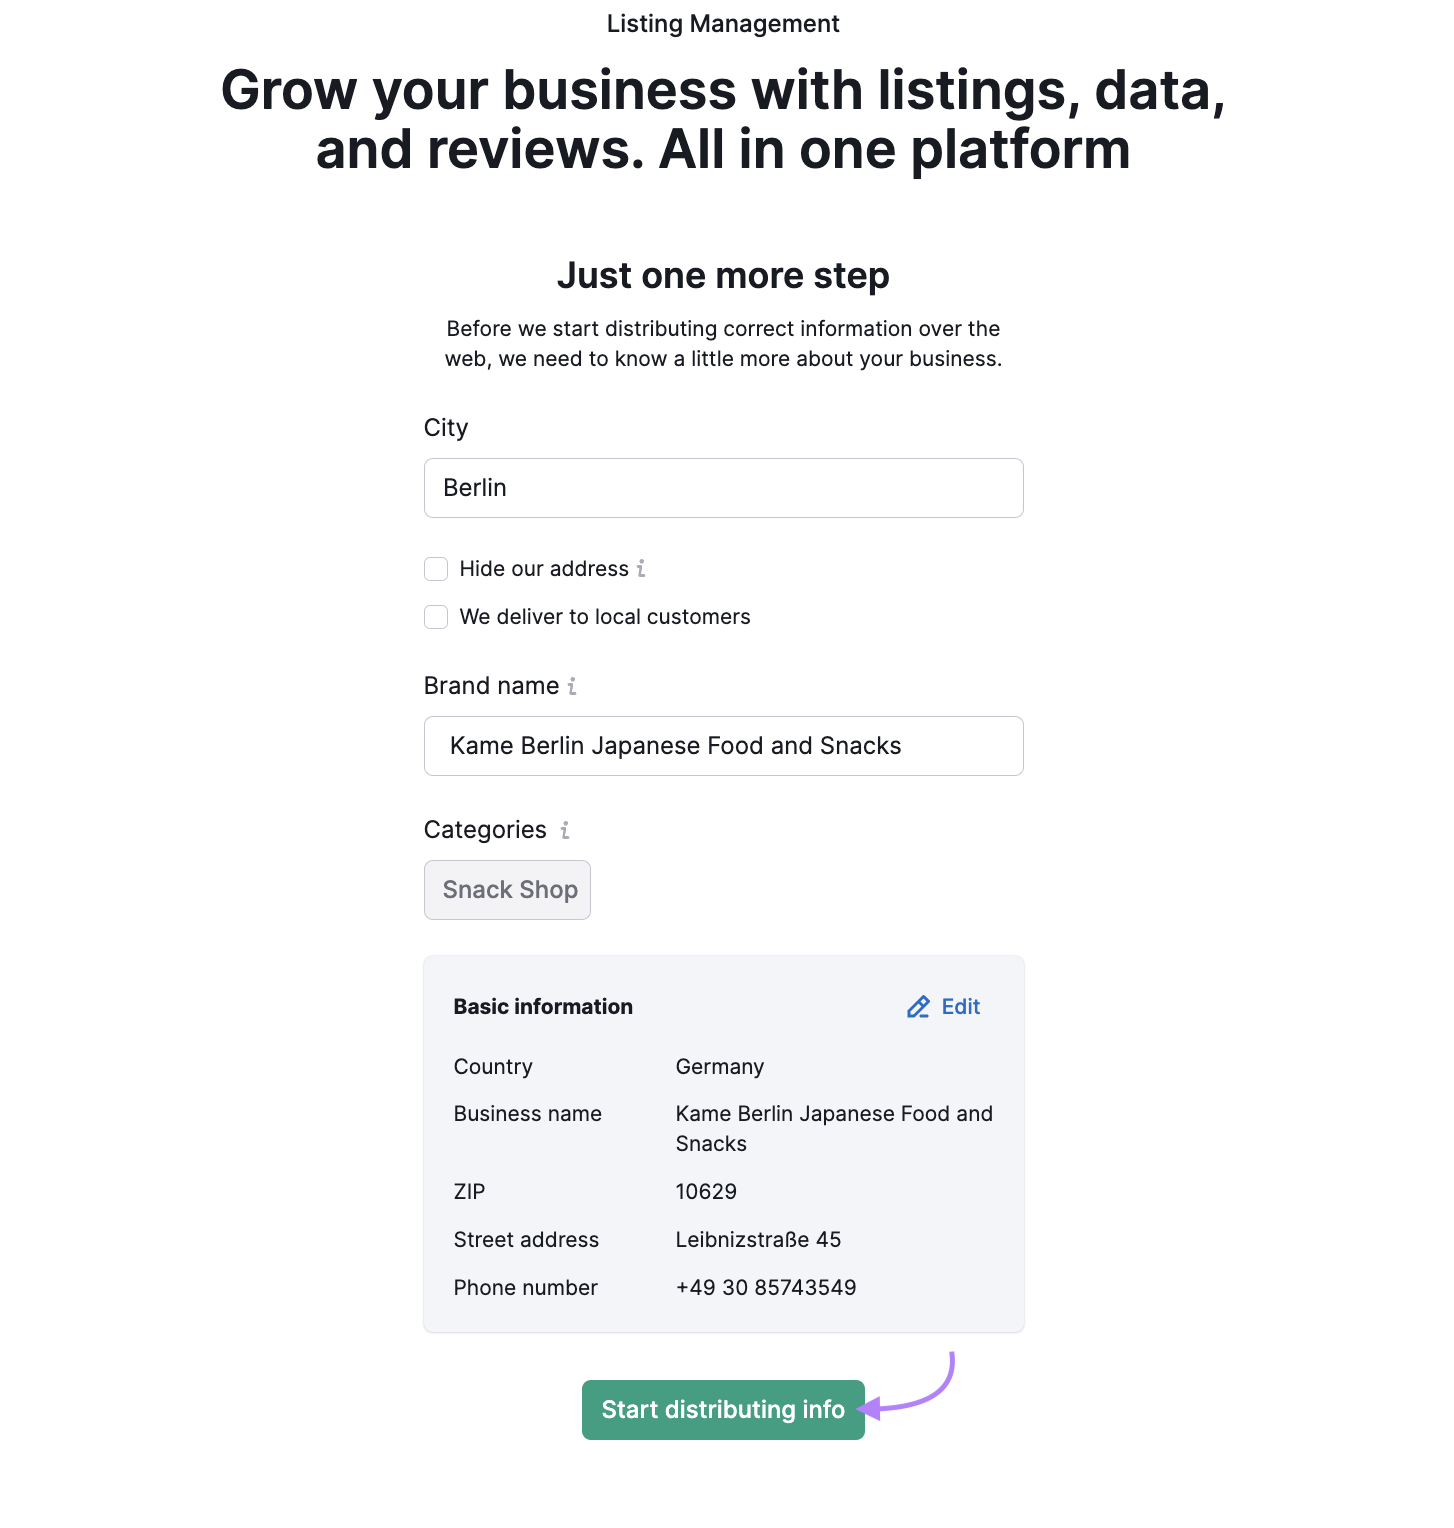 Enter your business information in Listing Management tool